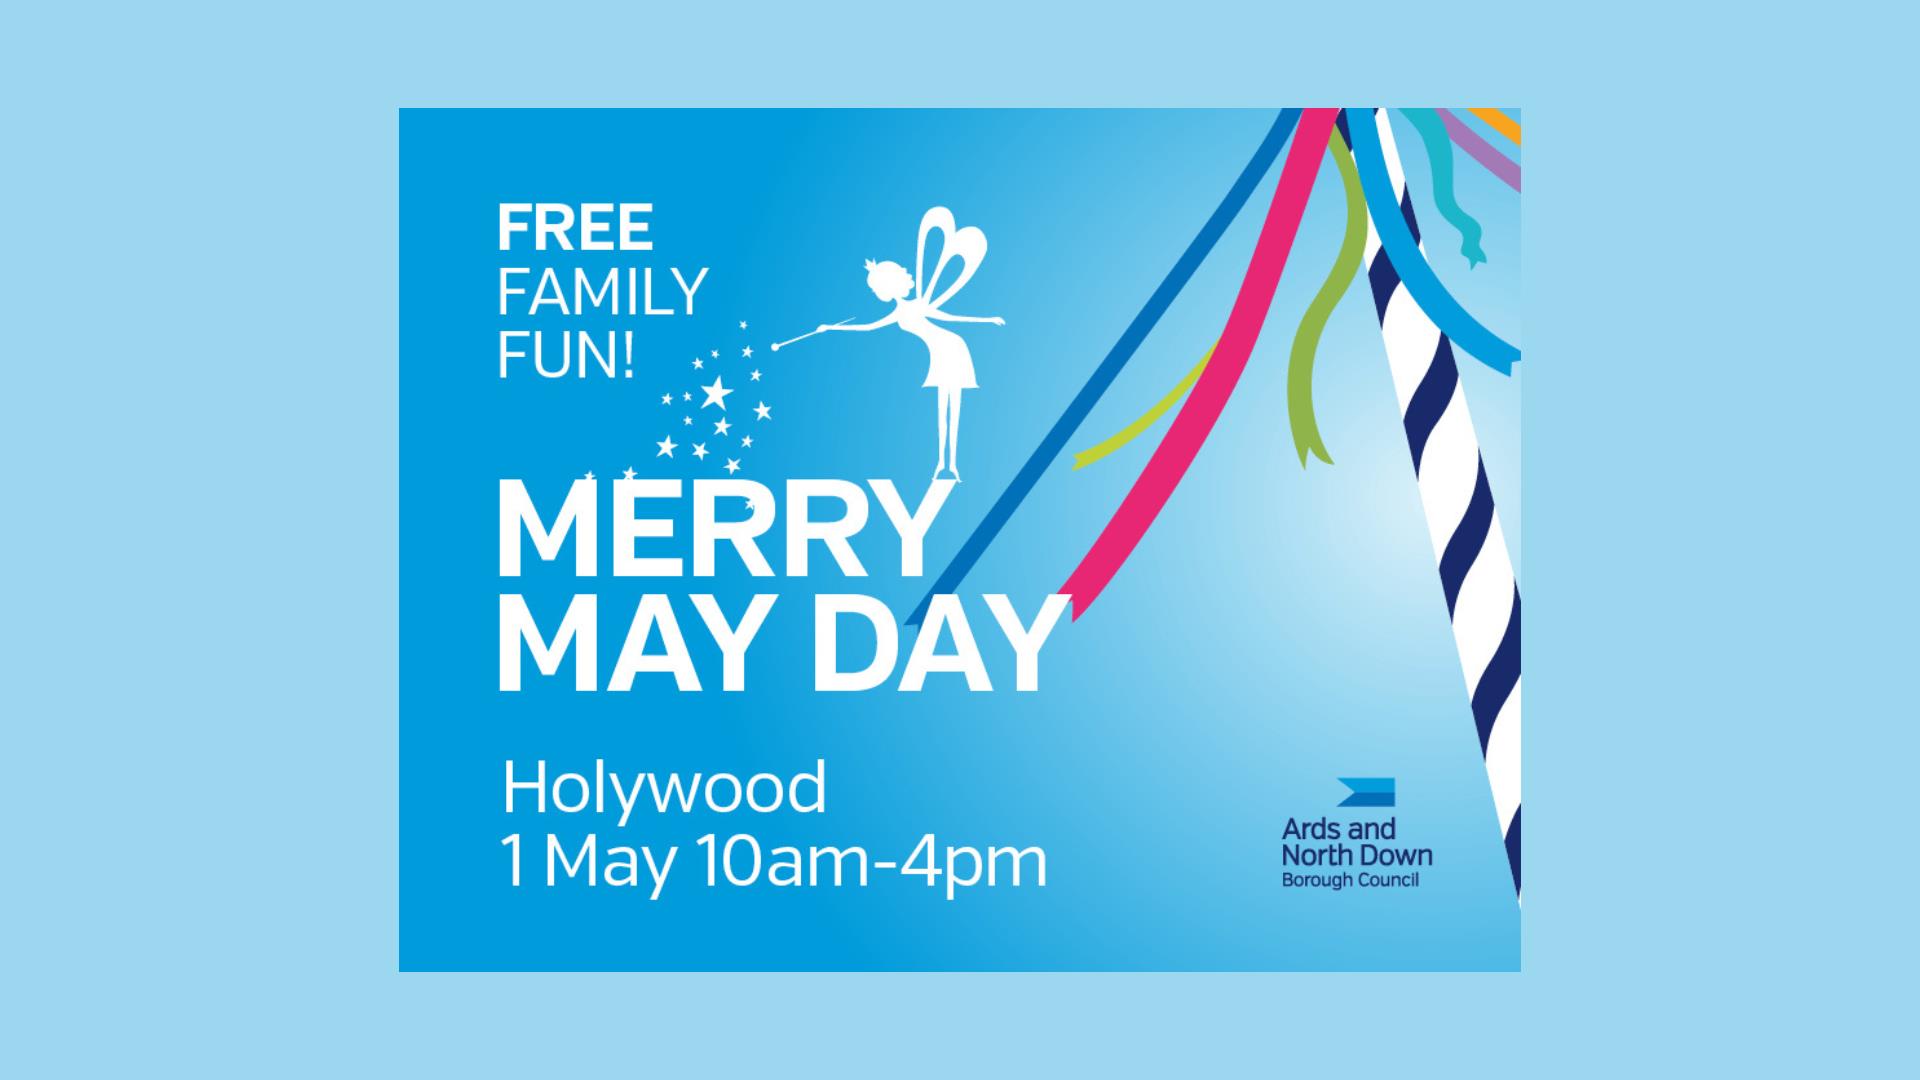 Merry May Day promotional image